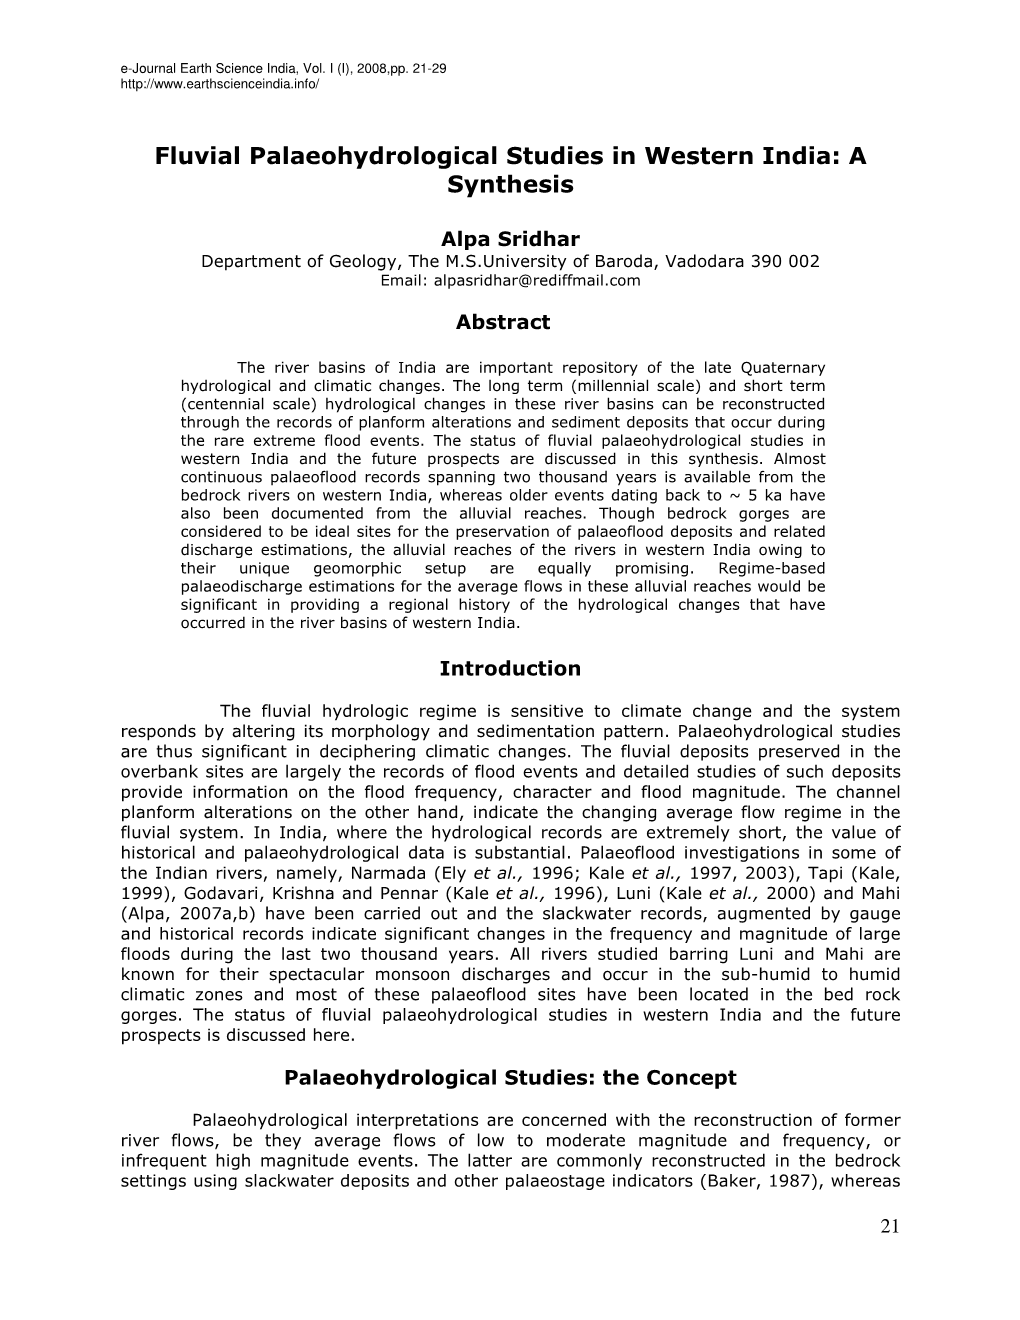 Fluvial Palaeohydrological Studies in Western India: a Synthesis